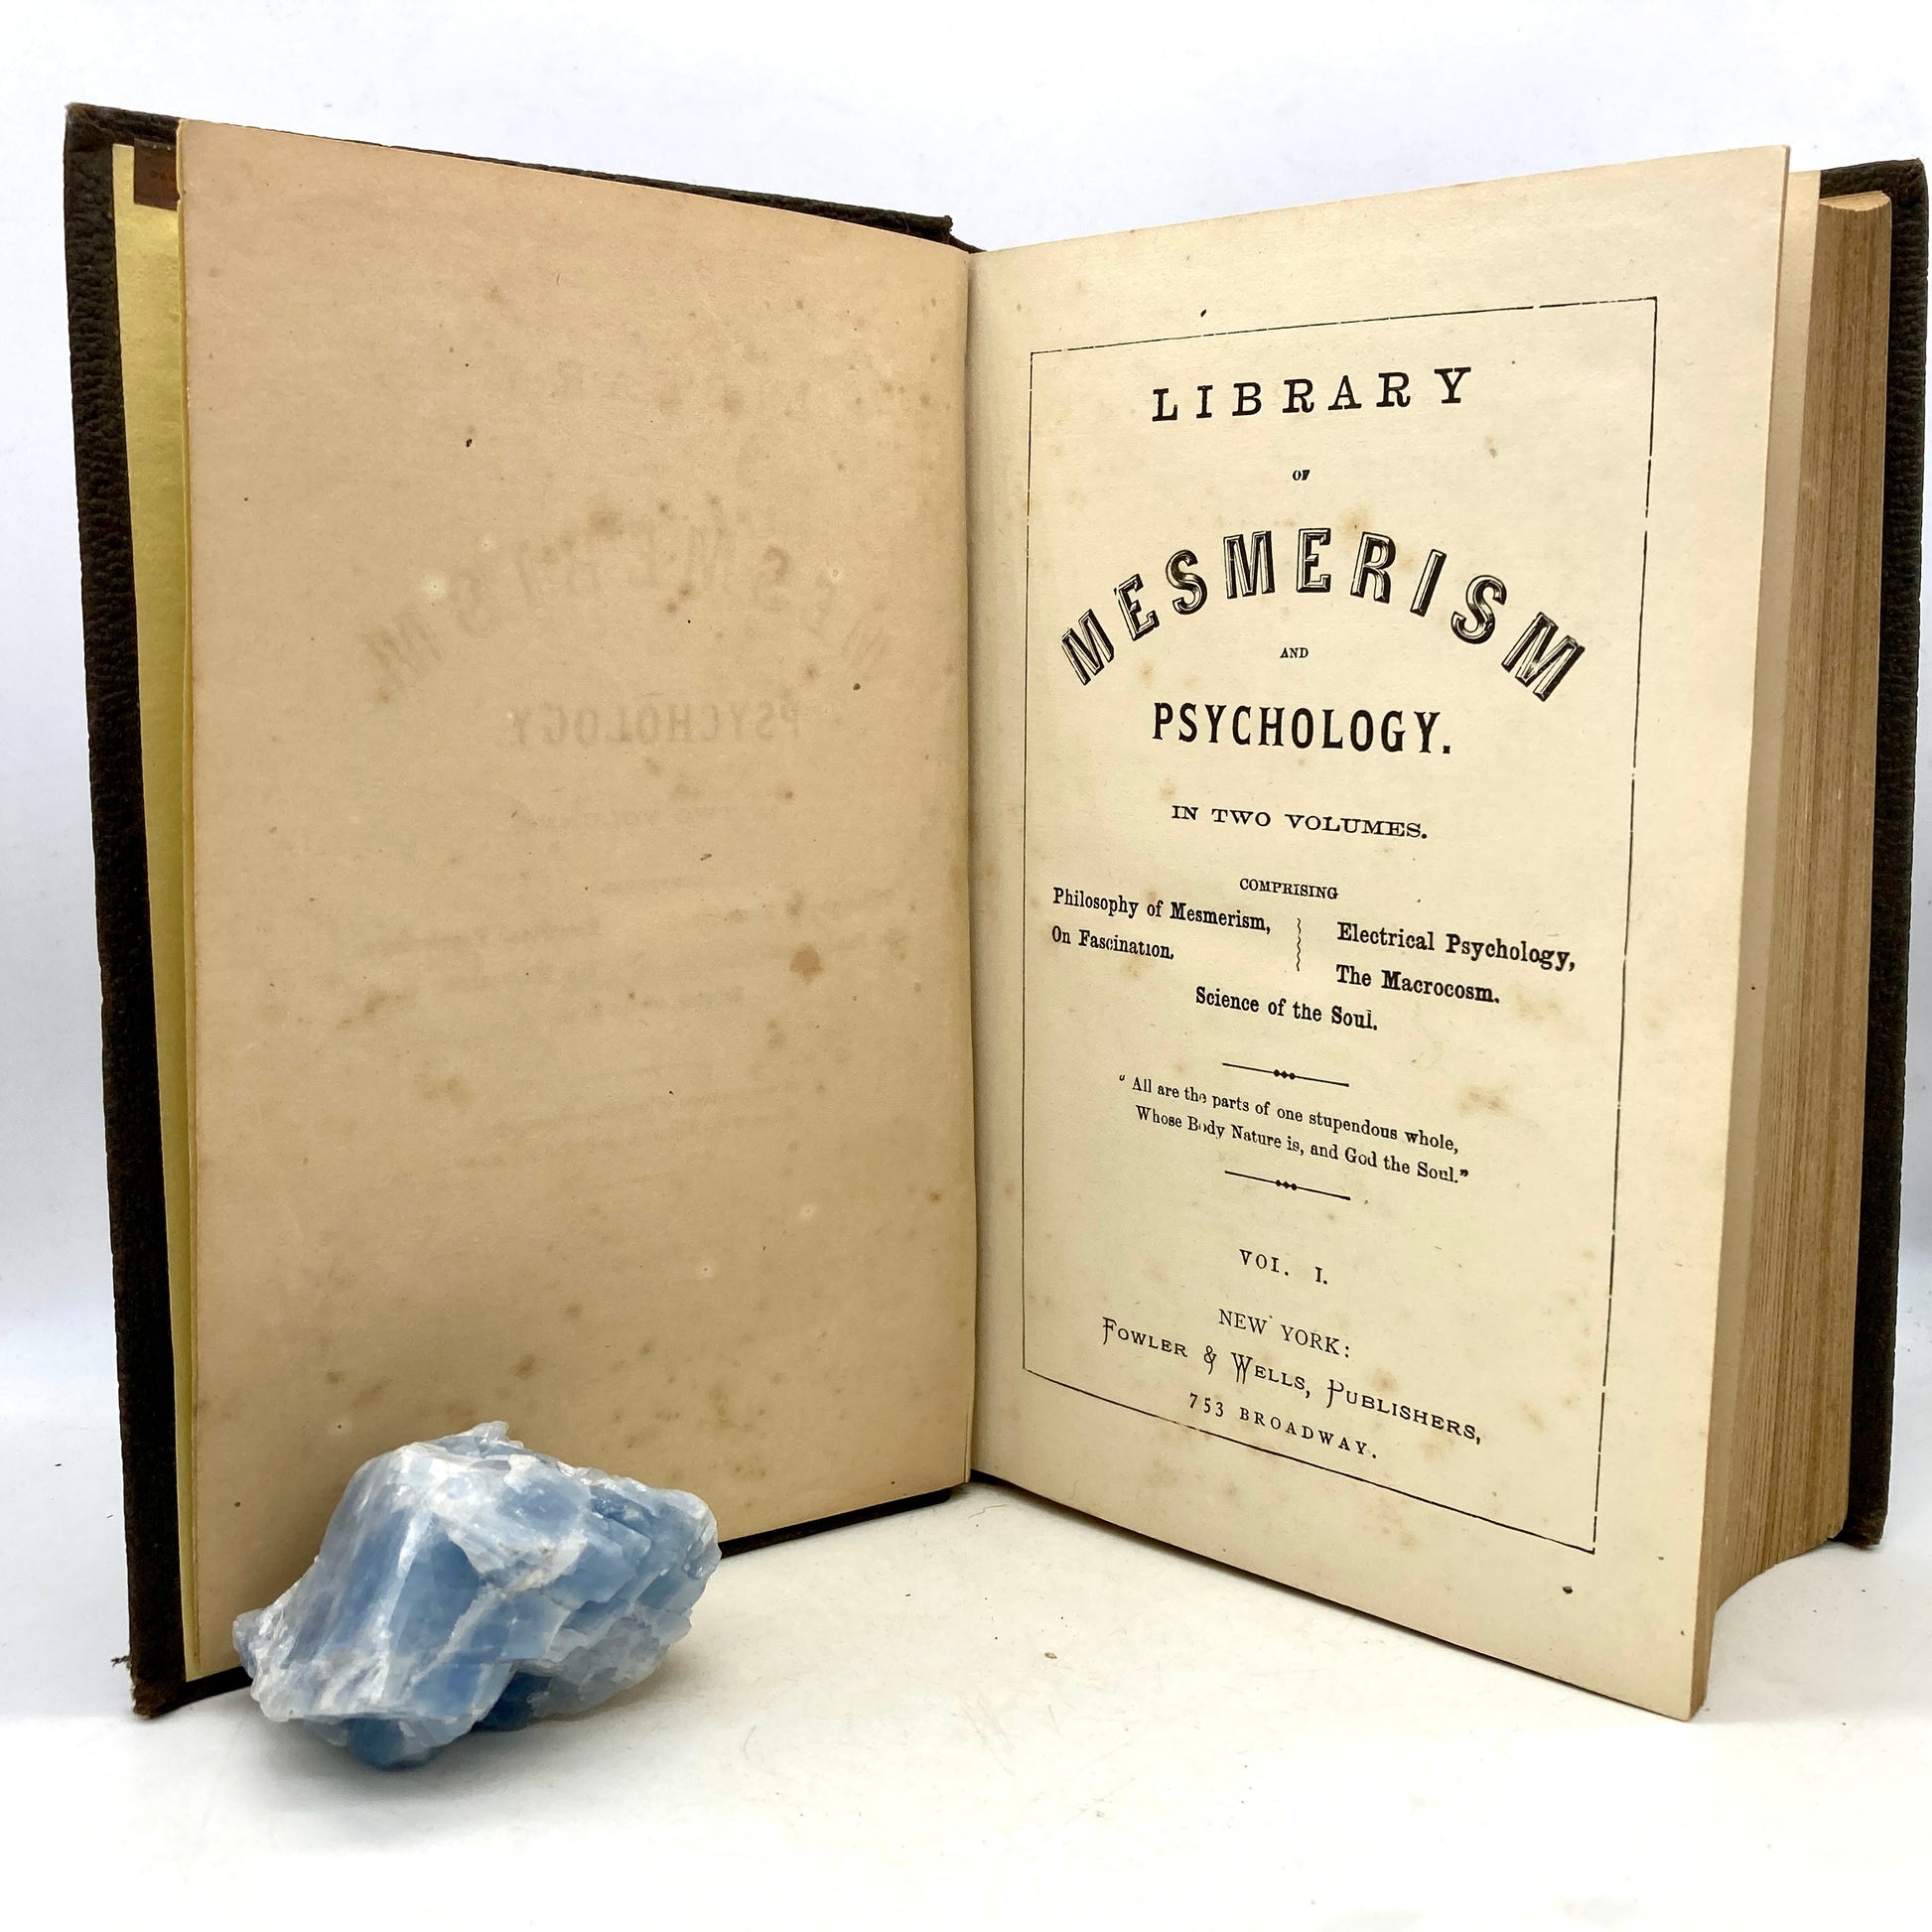 "Library of Mesmerism and Psychology" [Fowler & Wells, 1880] - Buzz Bookstore